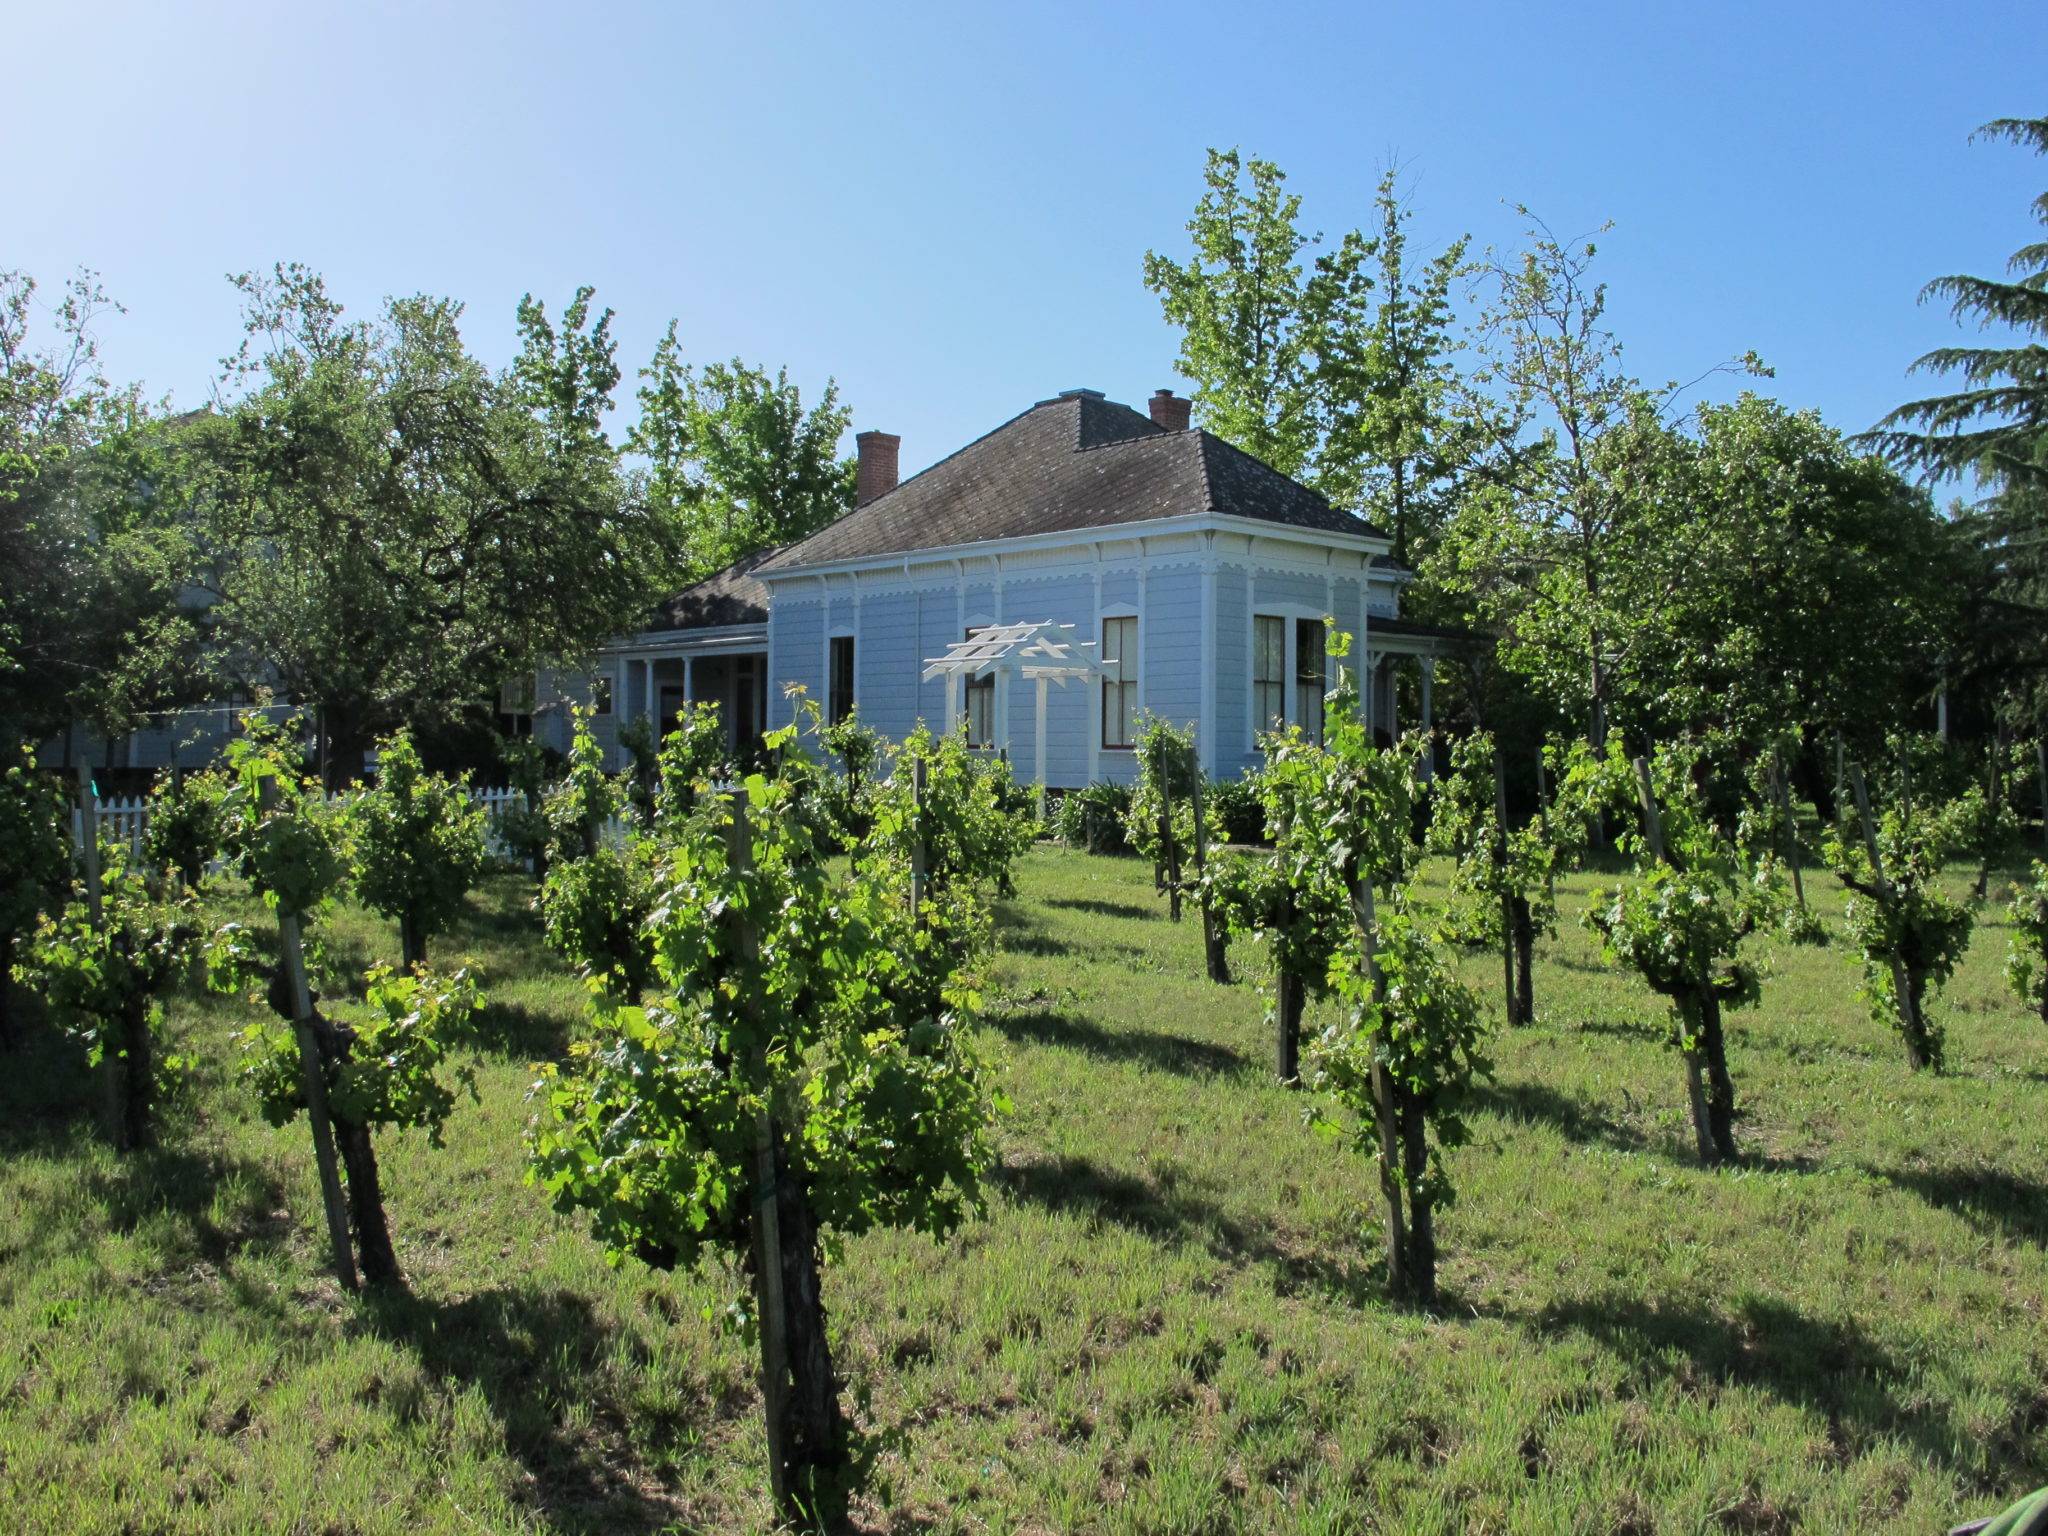 House and vineyard